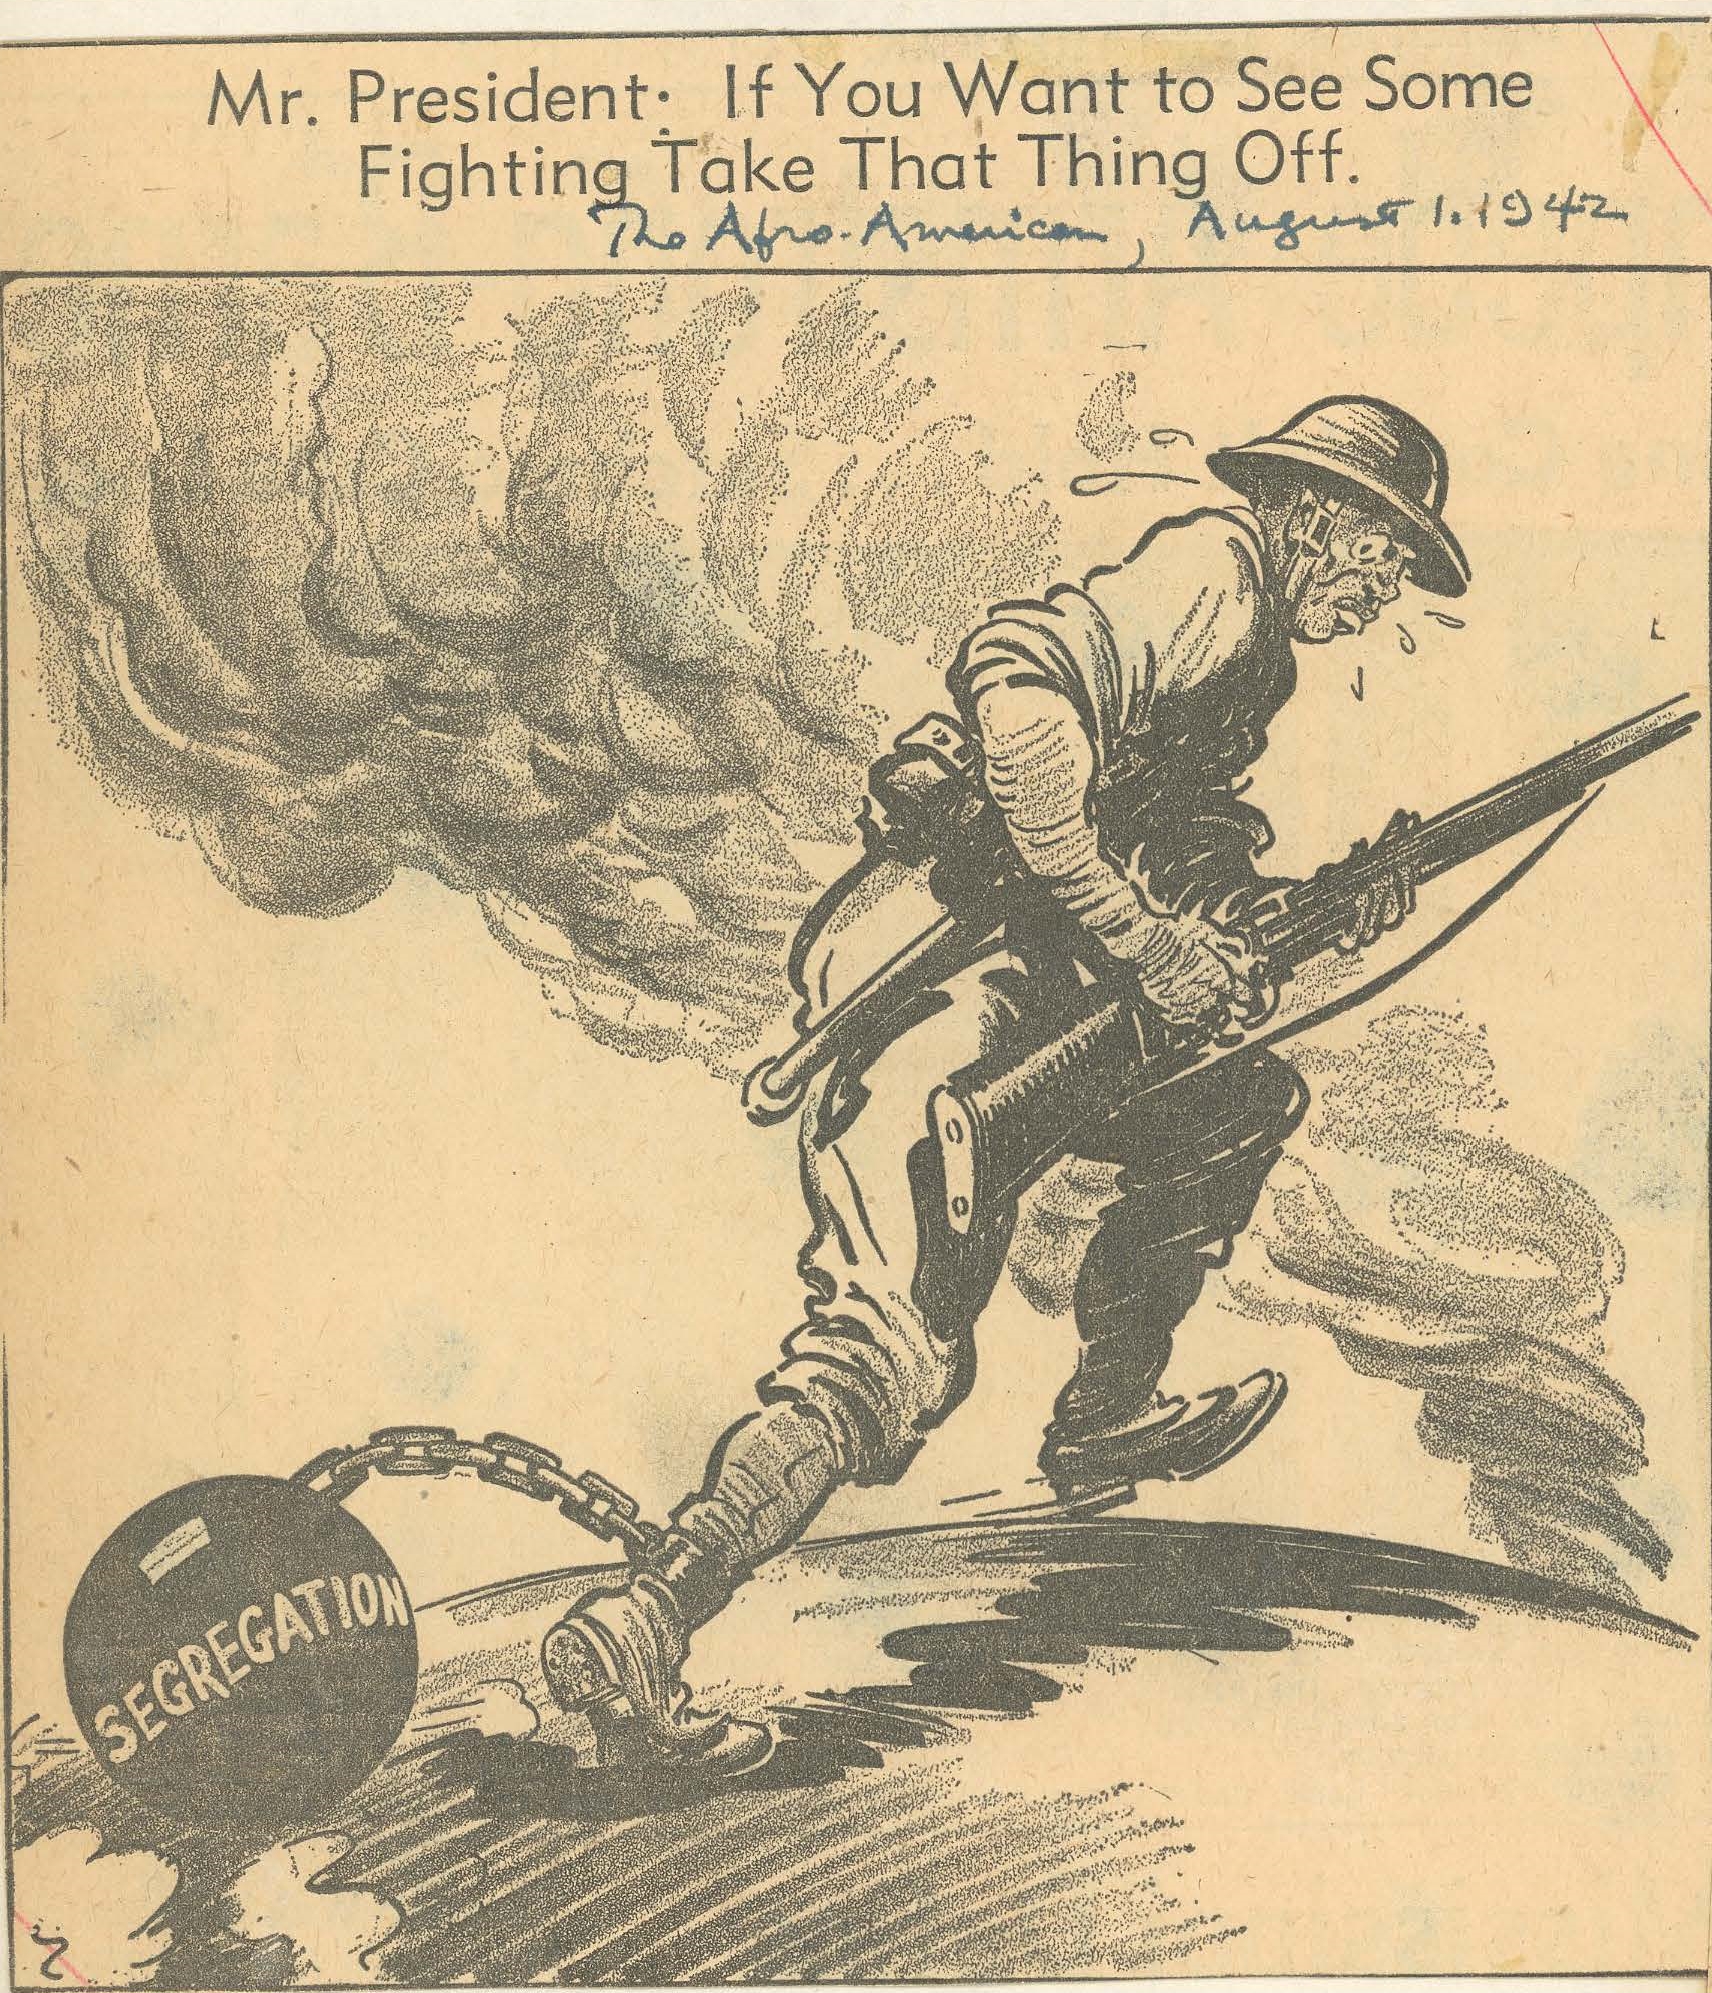 The political cartoon depicts an African-American soldier leaning forward carrying a weapon. A ball and chain is shackled to his right ankle. The ball is labeled "SEGREGATION." Cartoon caption - Mr. President: If You Want to See Some Fighting Take That Thing Off. The Afro-American, August 1, 1942.